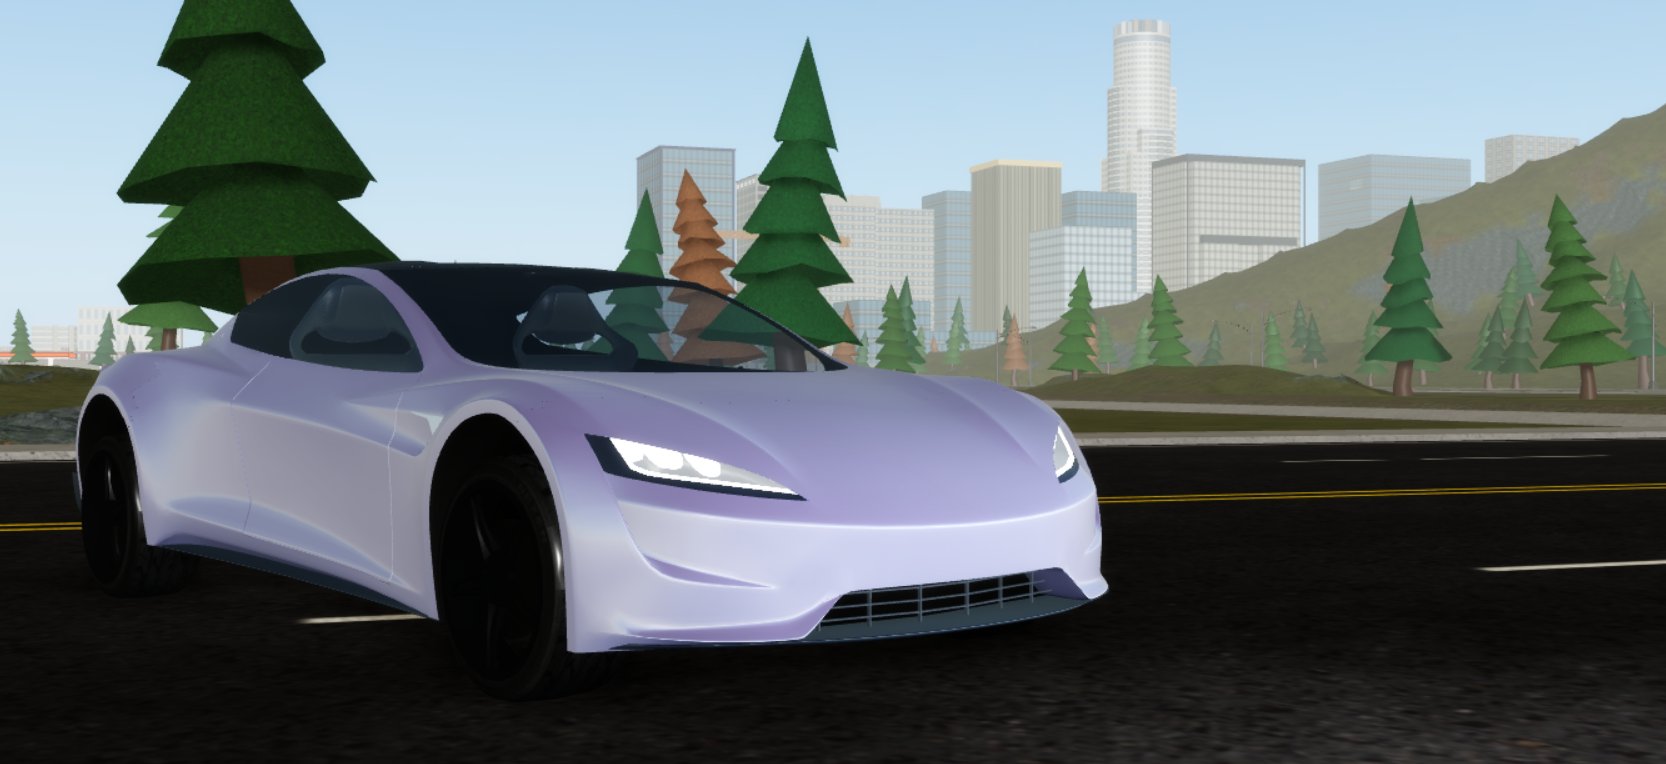 Vehicle Simulator On Twitter I M Curious To See What Our Community S Taste In Cars Looks Like Reply With A Picture Of Your Favourite Car In Vehiclesimulator I Ll Start Https T Co Ysd9jkomgh - roblox vehicle simulator huracan